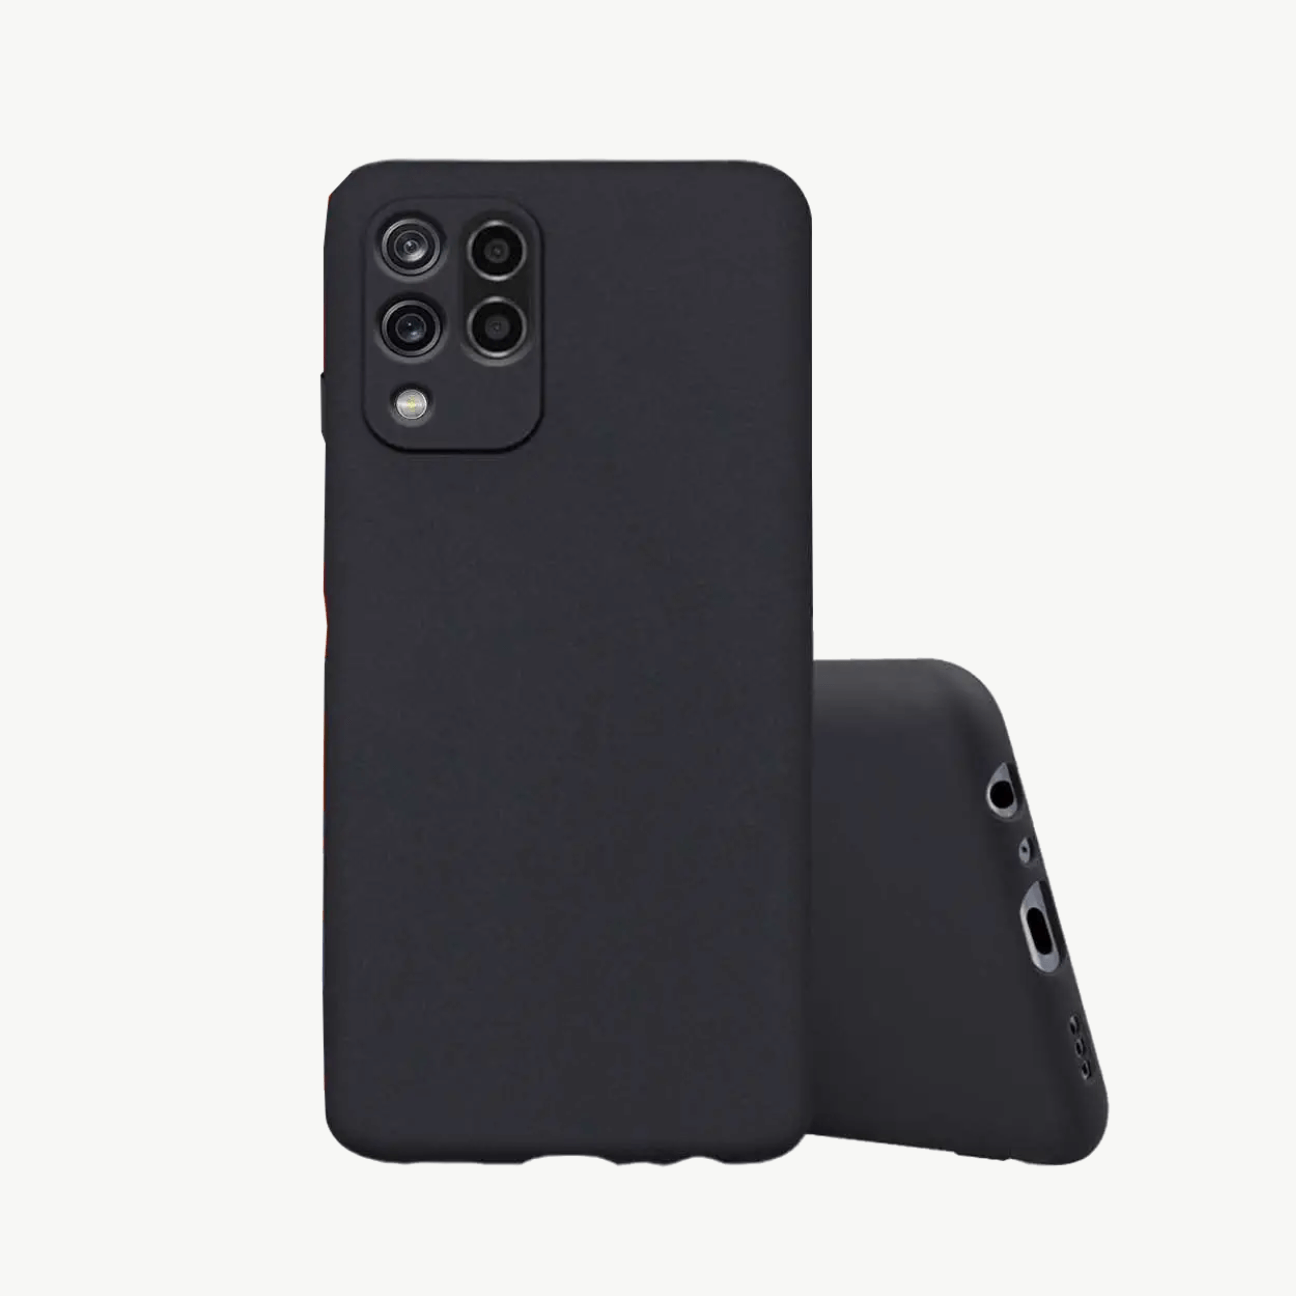 Oppo Find X2 (2020) Black Soft Silicone Phone Case Image